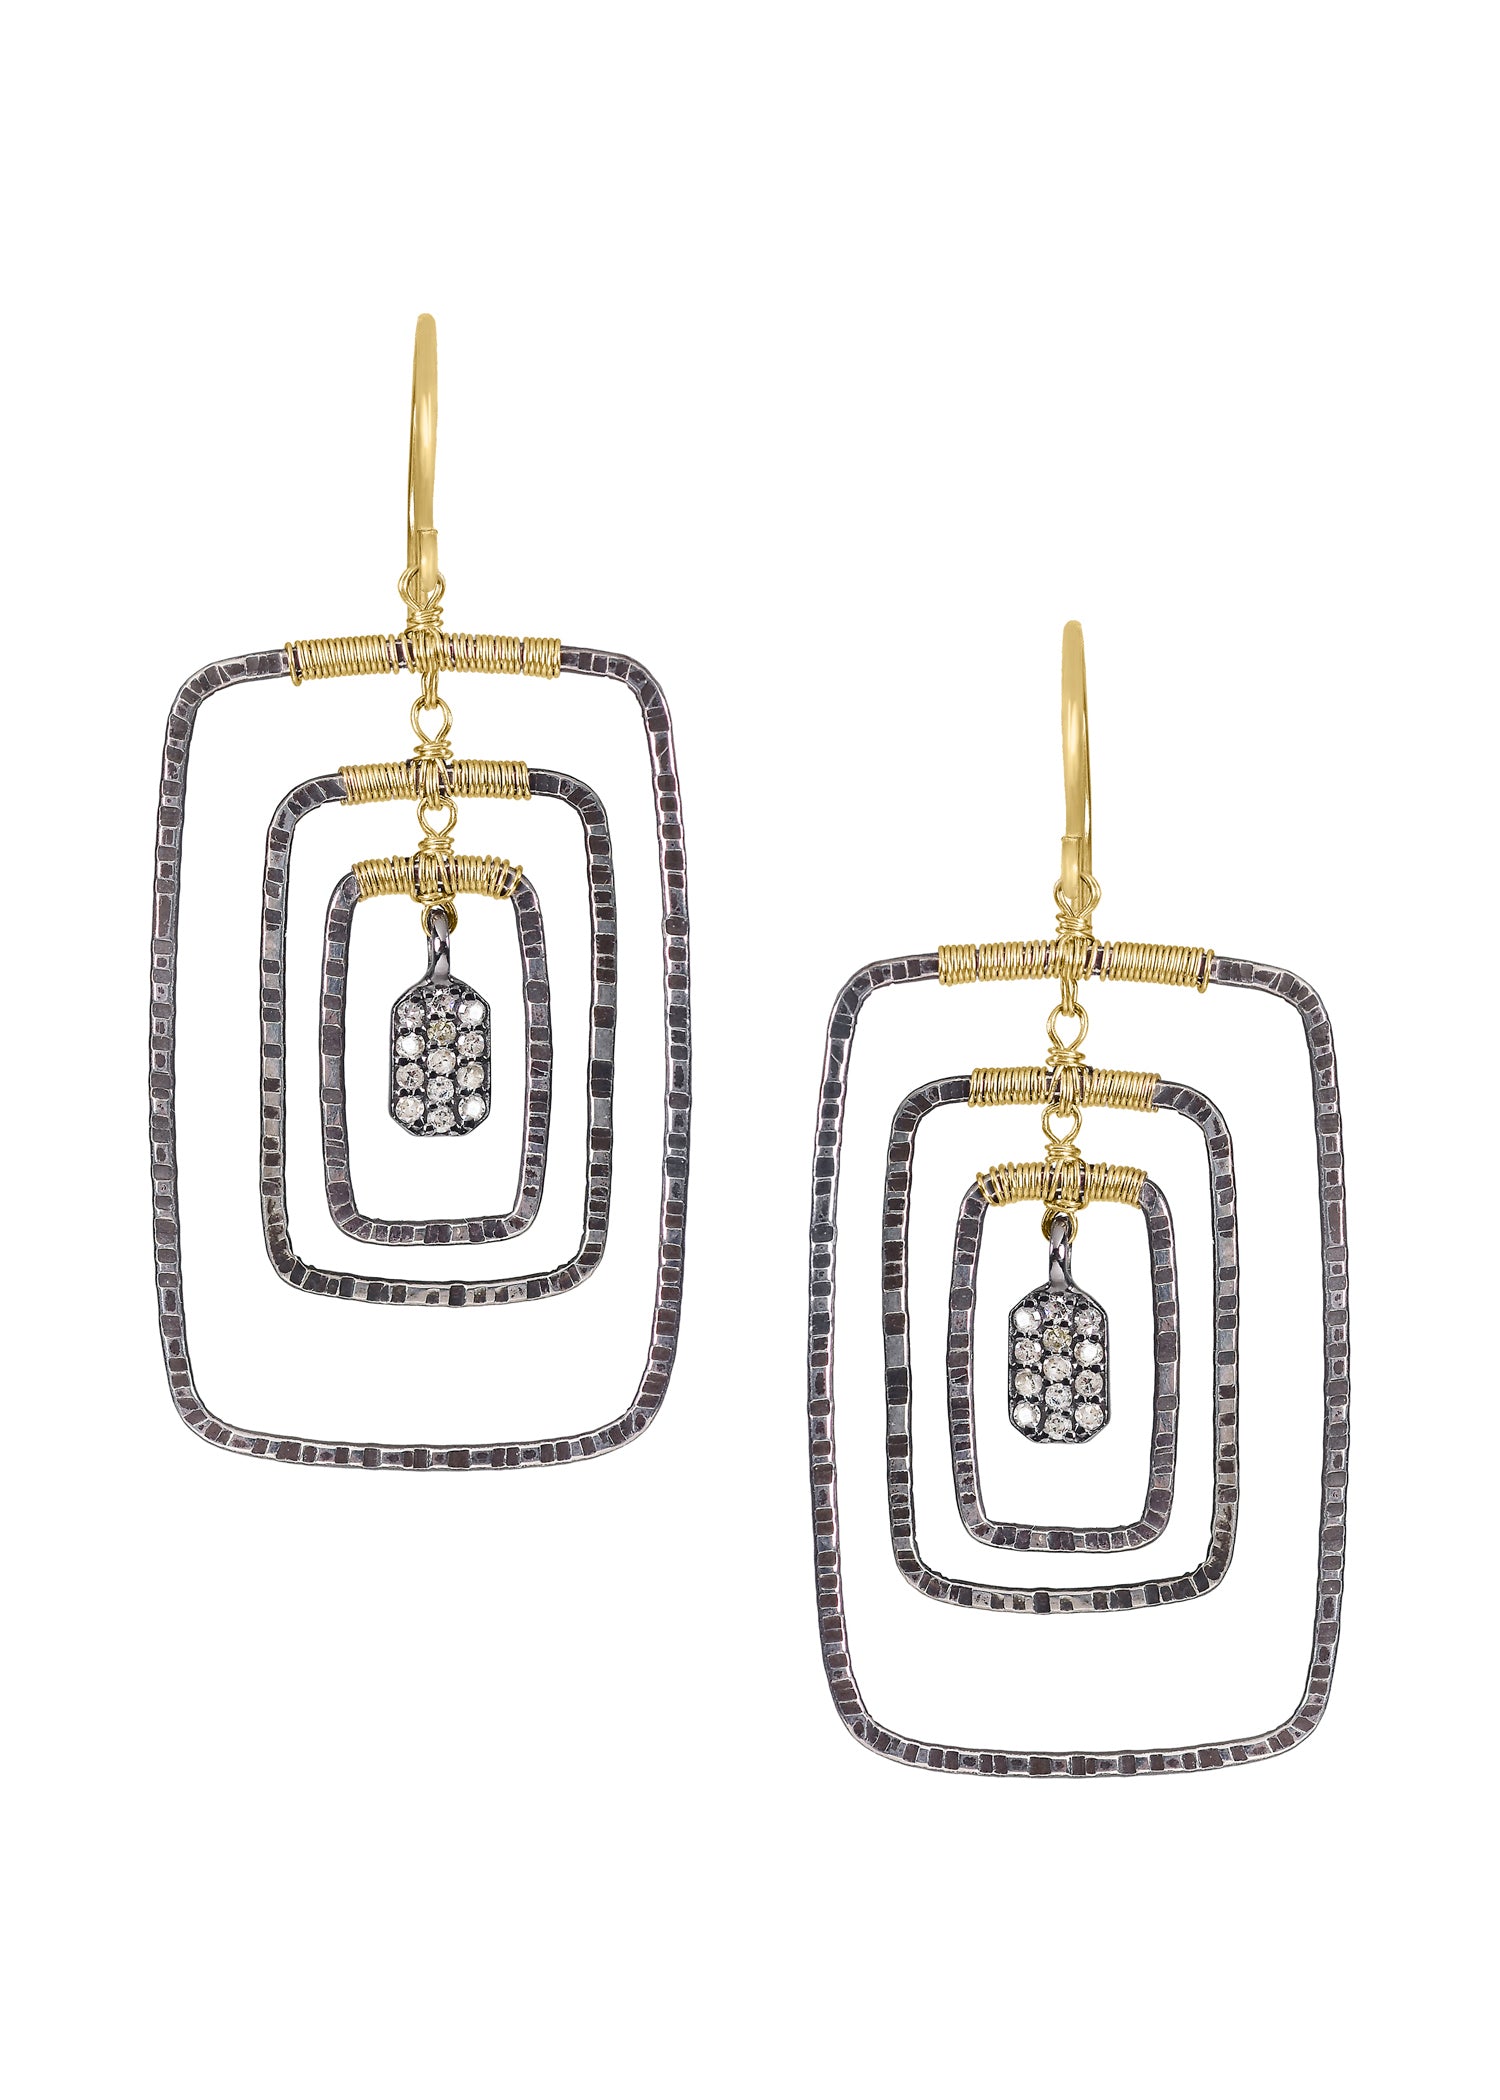 Diamond 14k gold Sterling silver Mixed metal Earrings measure 1-15/16" in length (including the ear wires) and 13/16" in width at the widest point Handmade in our Los Angeles studio